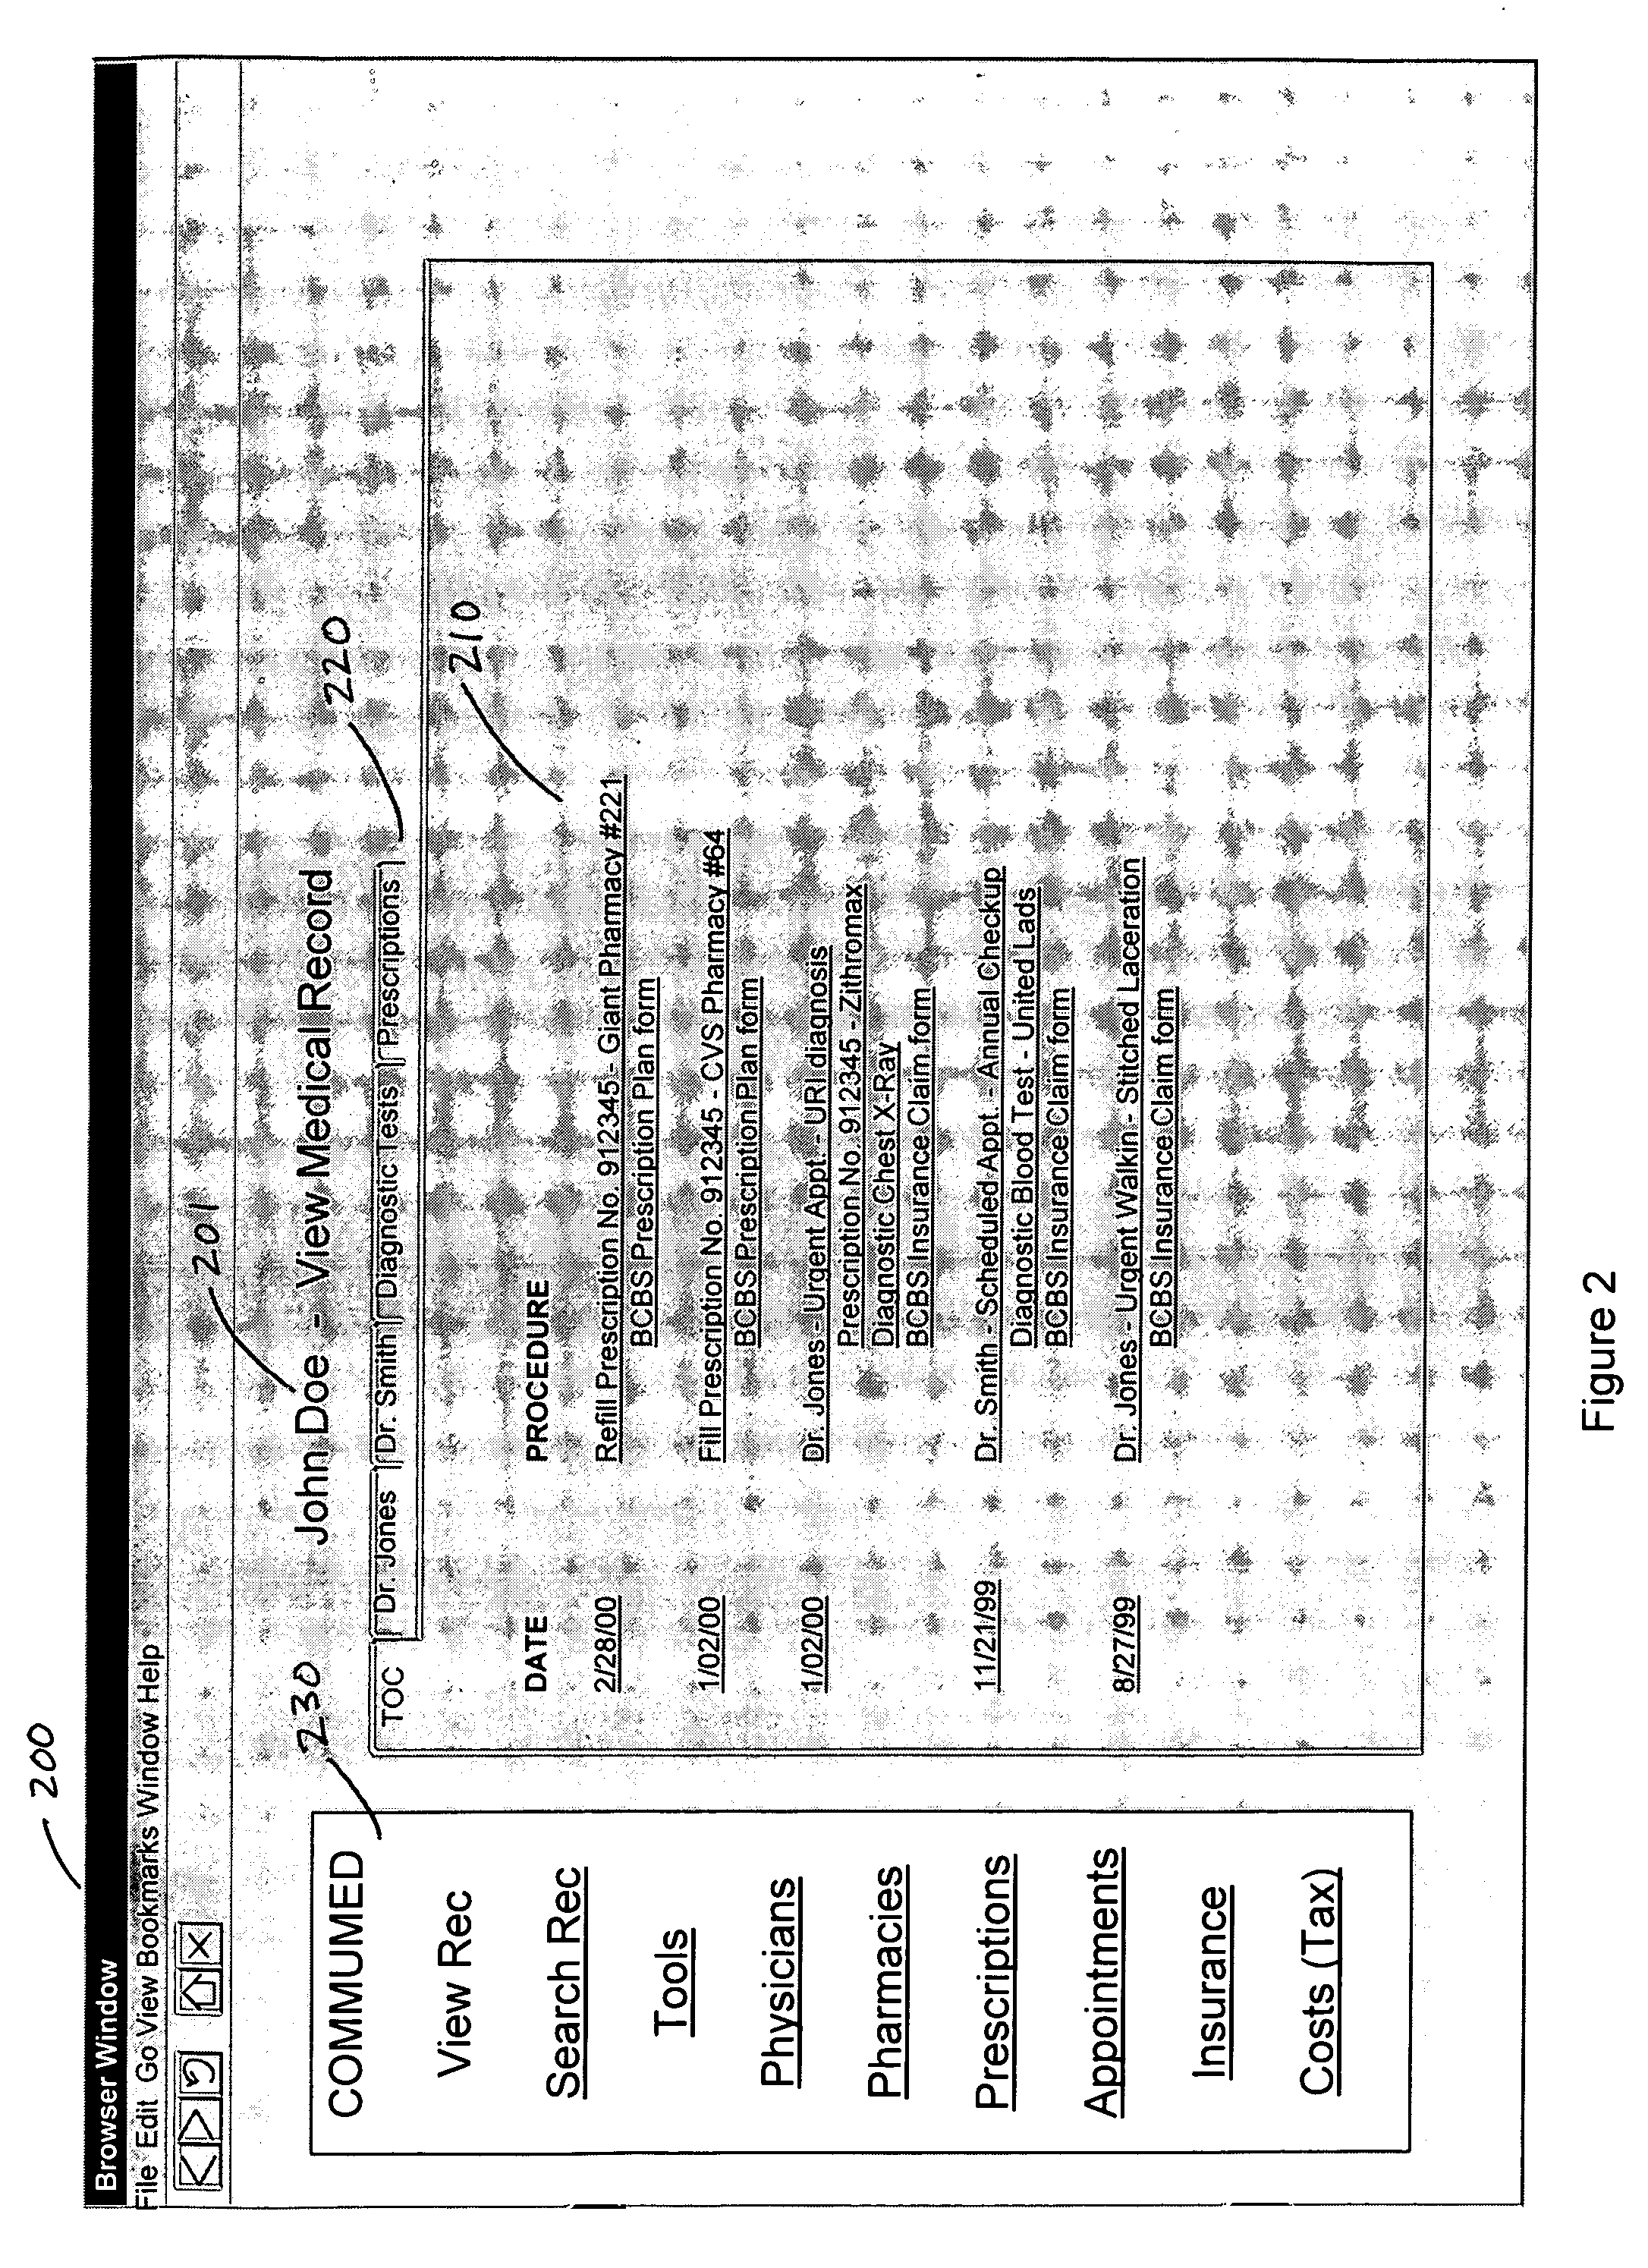 Patient-controlled medical information system and method